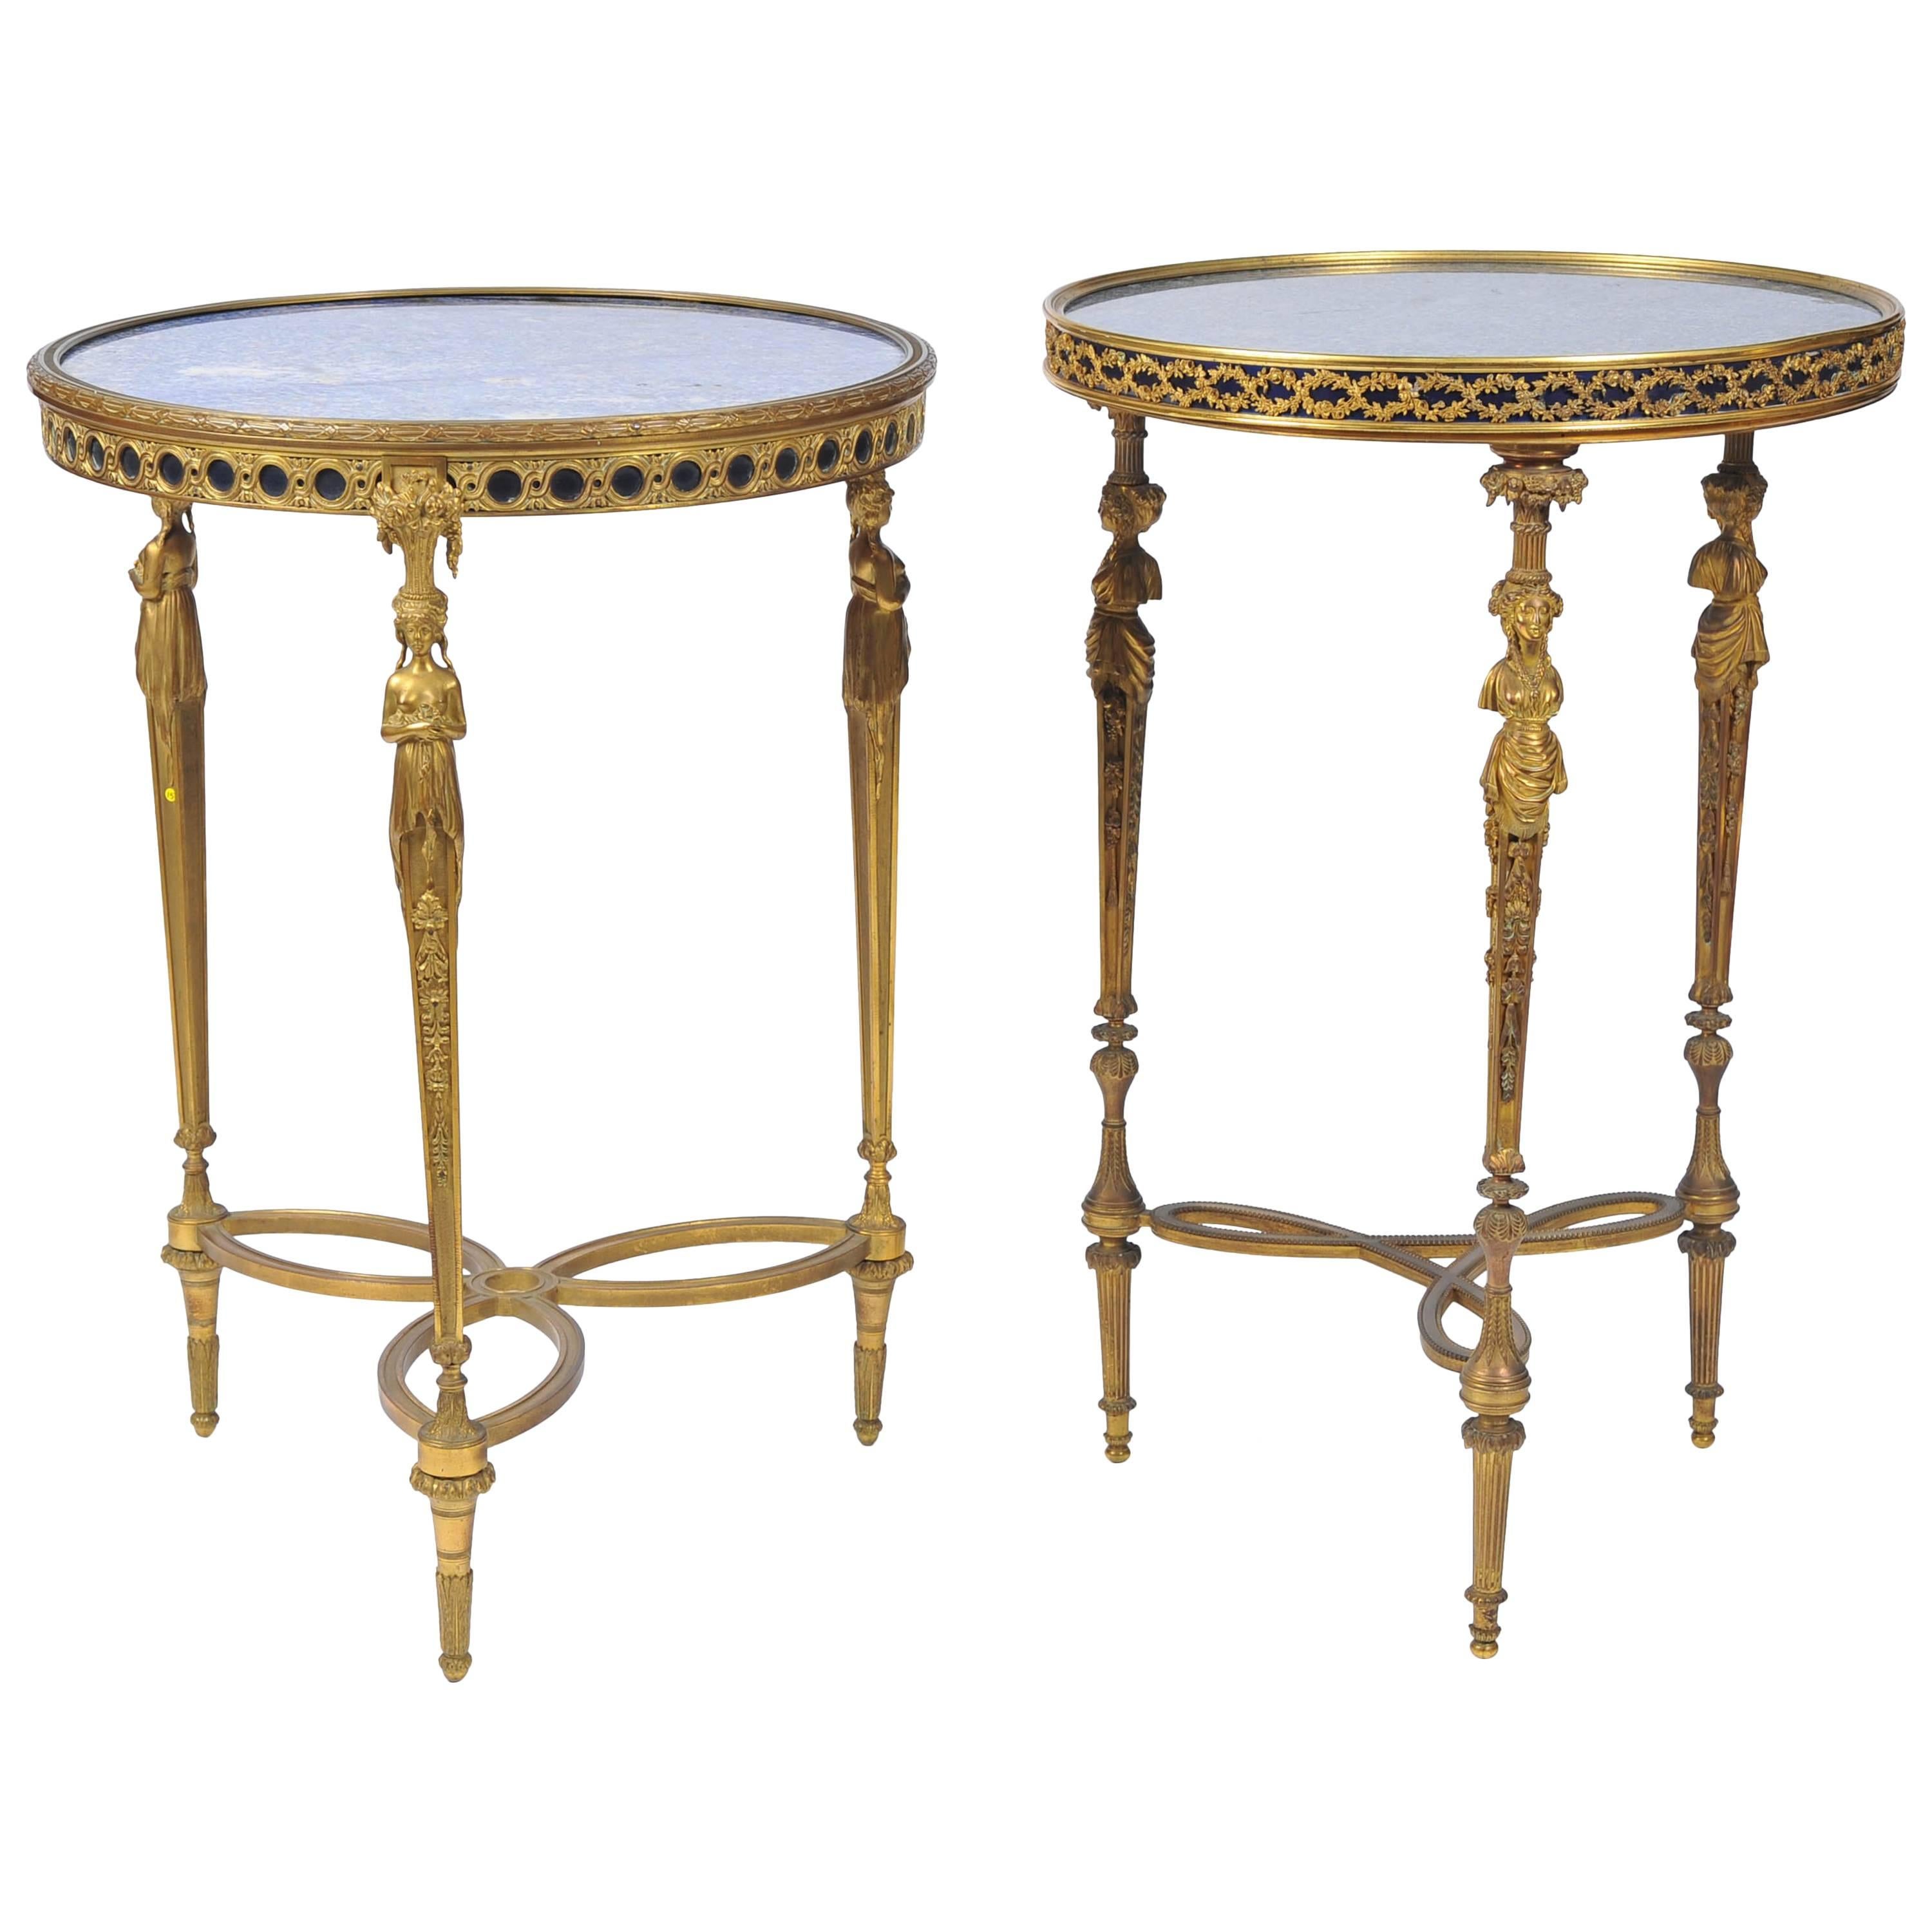 Near Pair of C19th Louis XVI Style Tables, in the manner of Weisweiller. For Sale